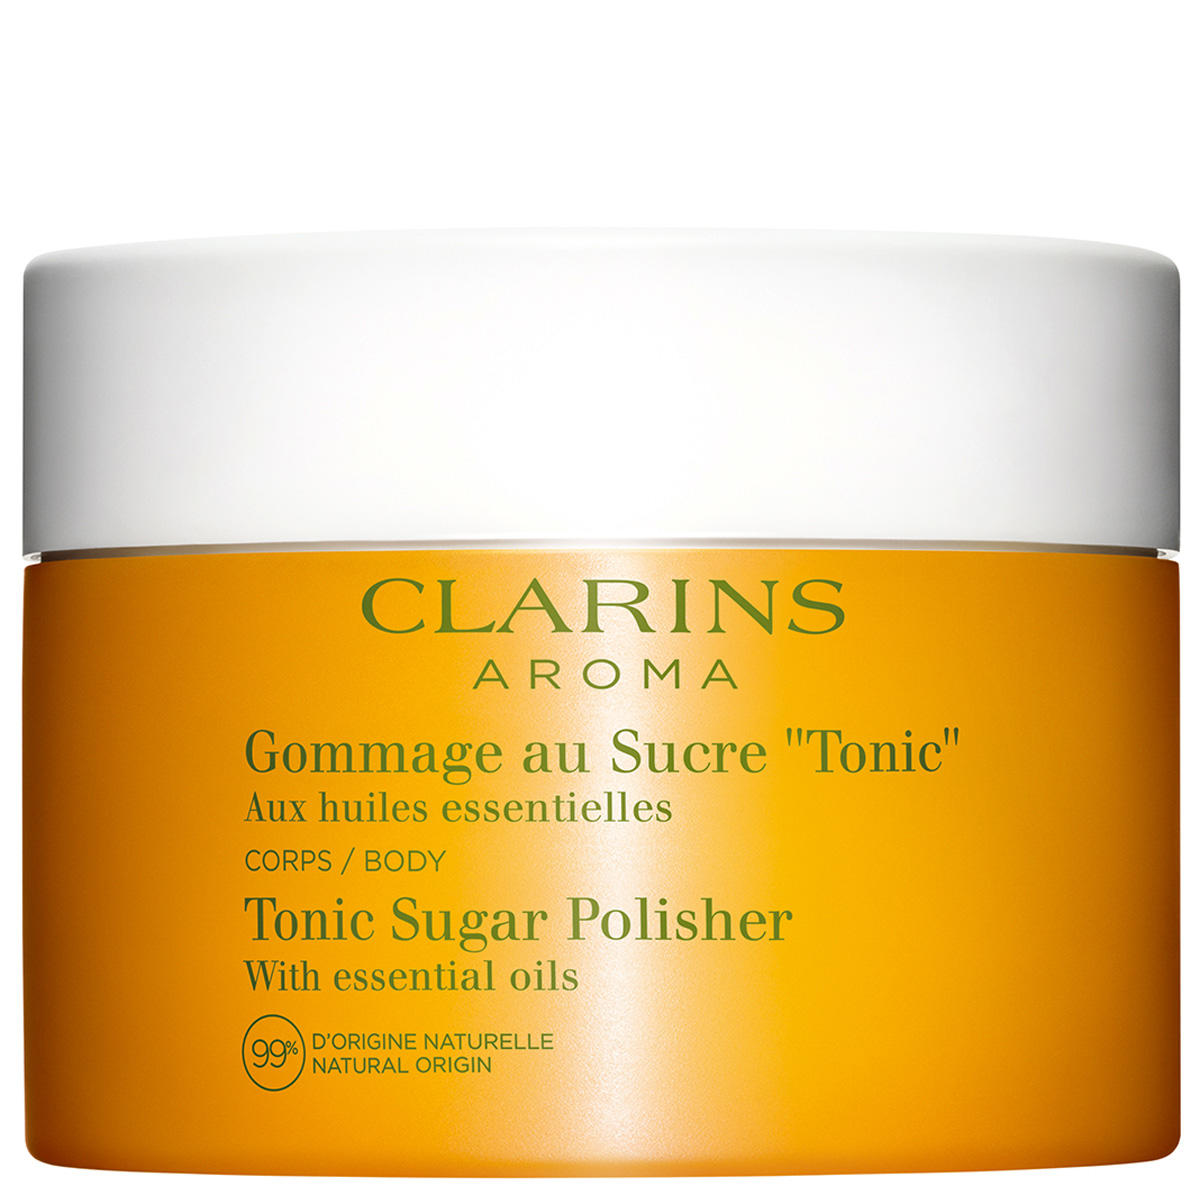 CLARINS AROMA Gommage au Sucre "Tonic"  250 g - 1